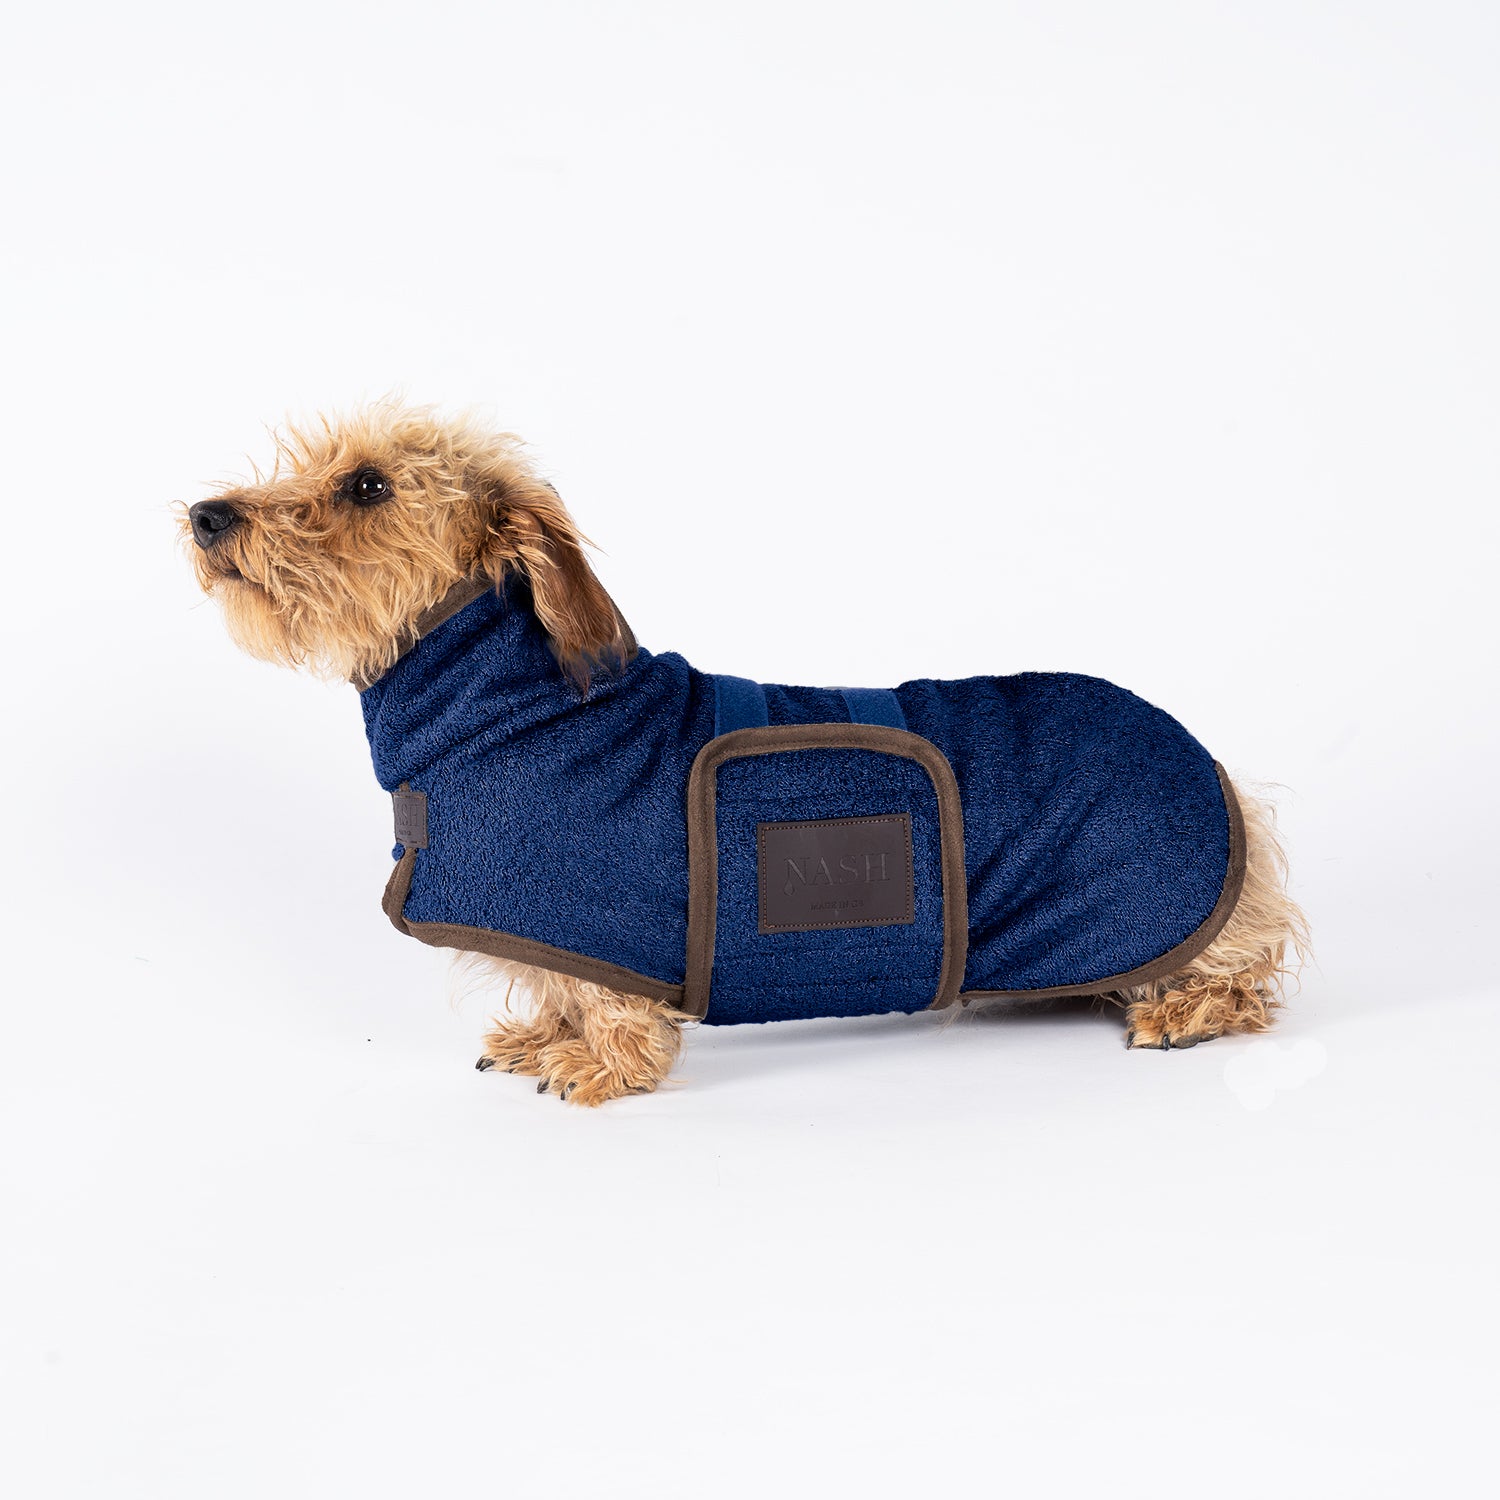 Small dog wearing a navy blue bamboo dog drying coat by NASH Dog Co.